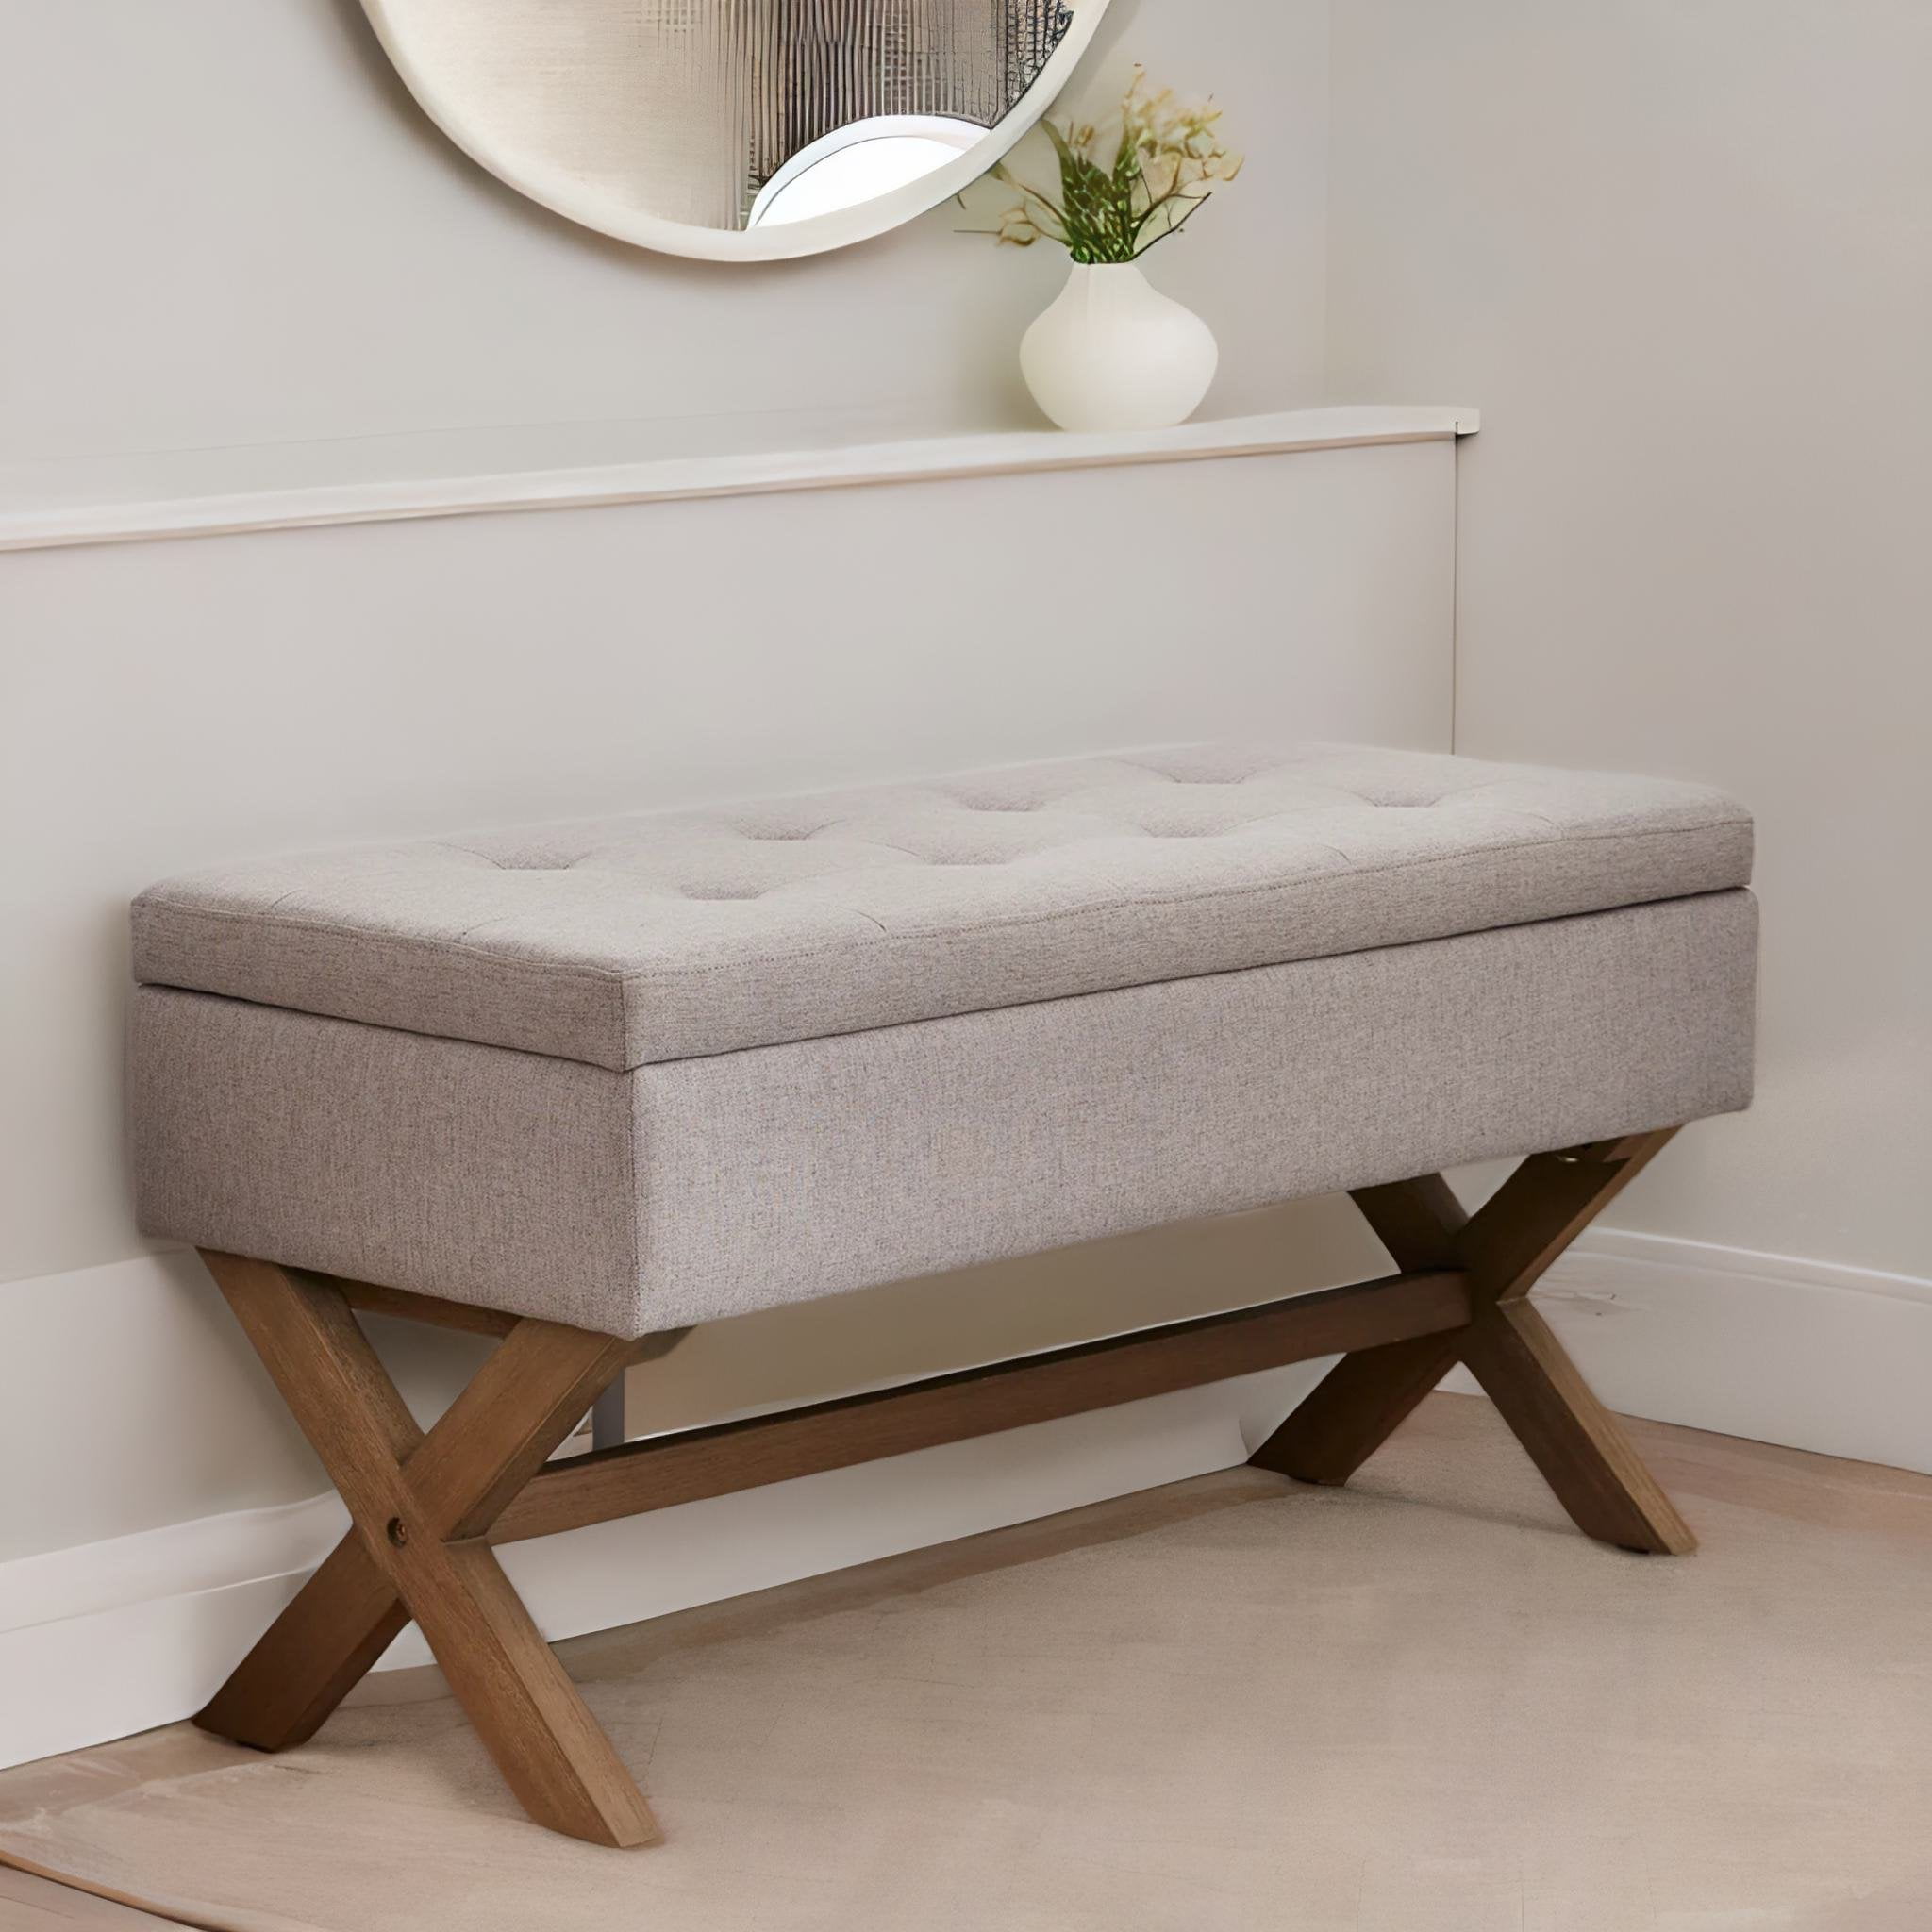 White Shoe Bench with Mirror and Cushion - Modern Entryway Organizer - 35.4W